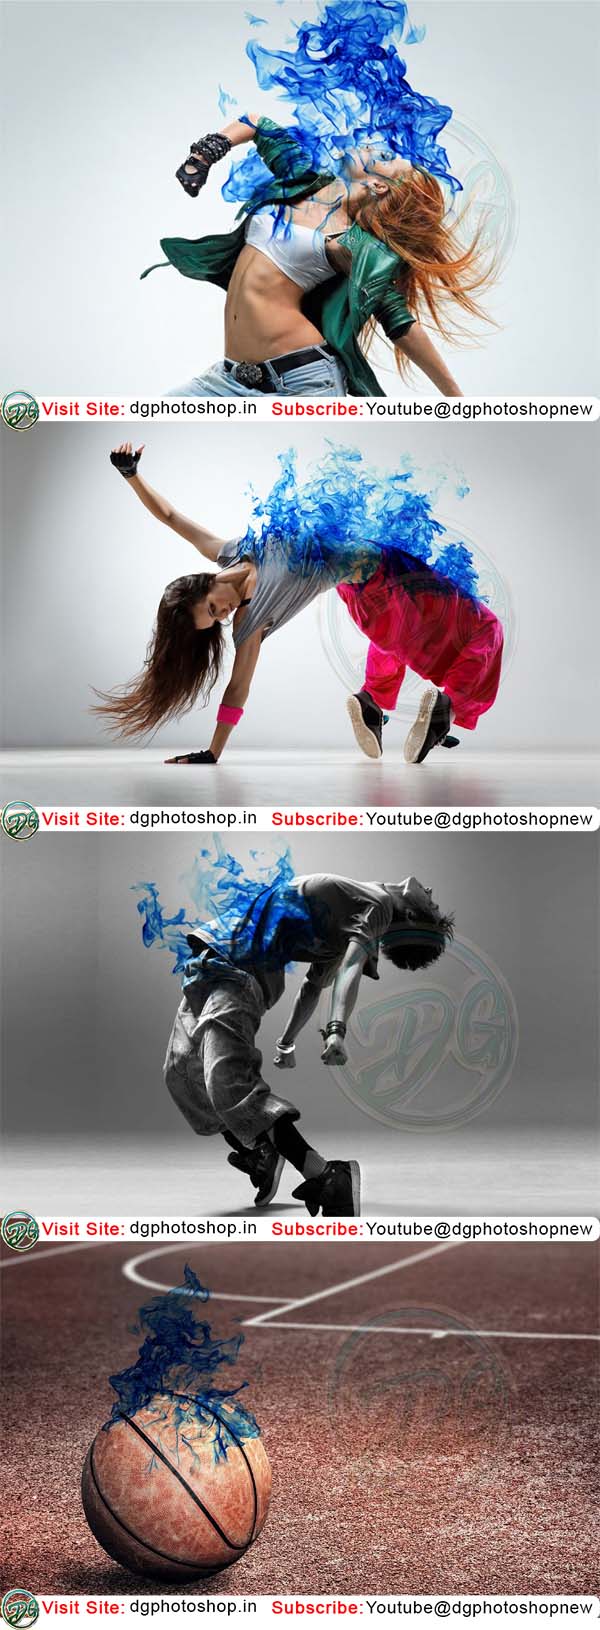 Photoshop Action to Create a Blue Fire Effect